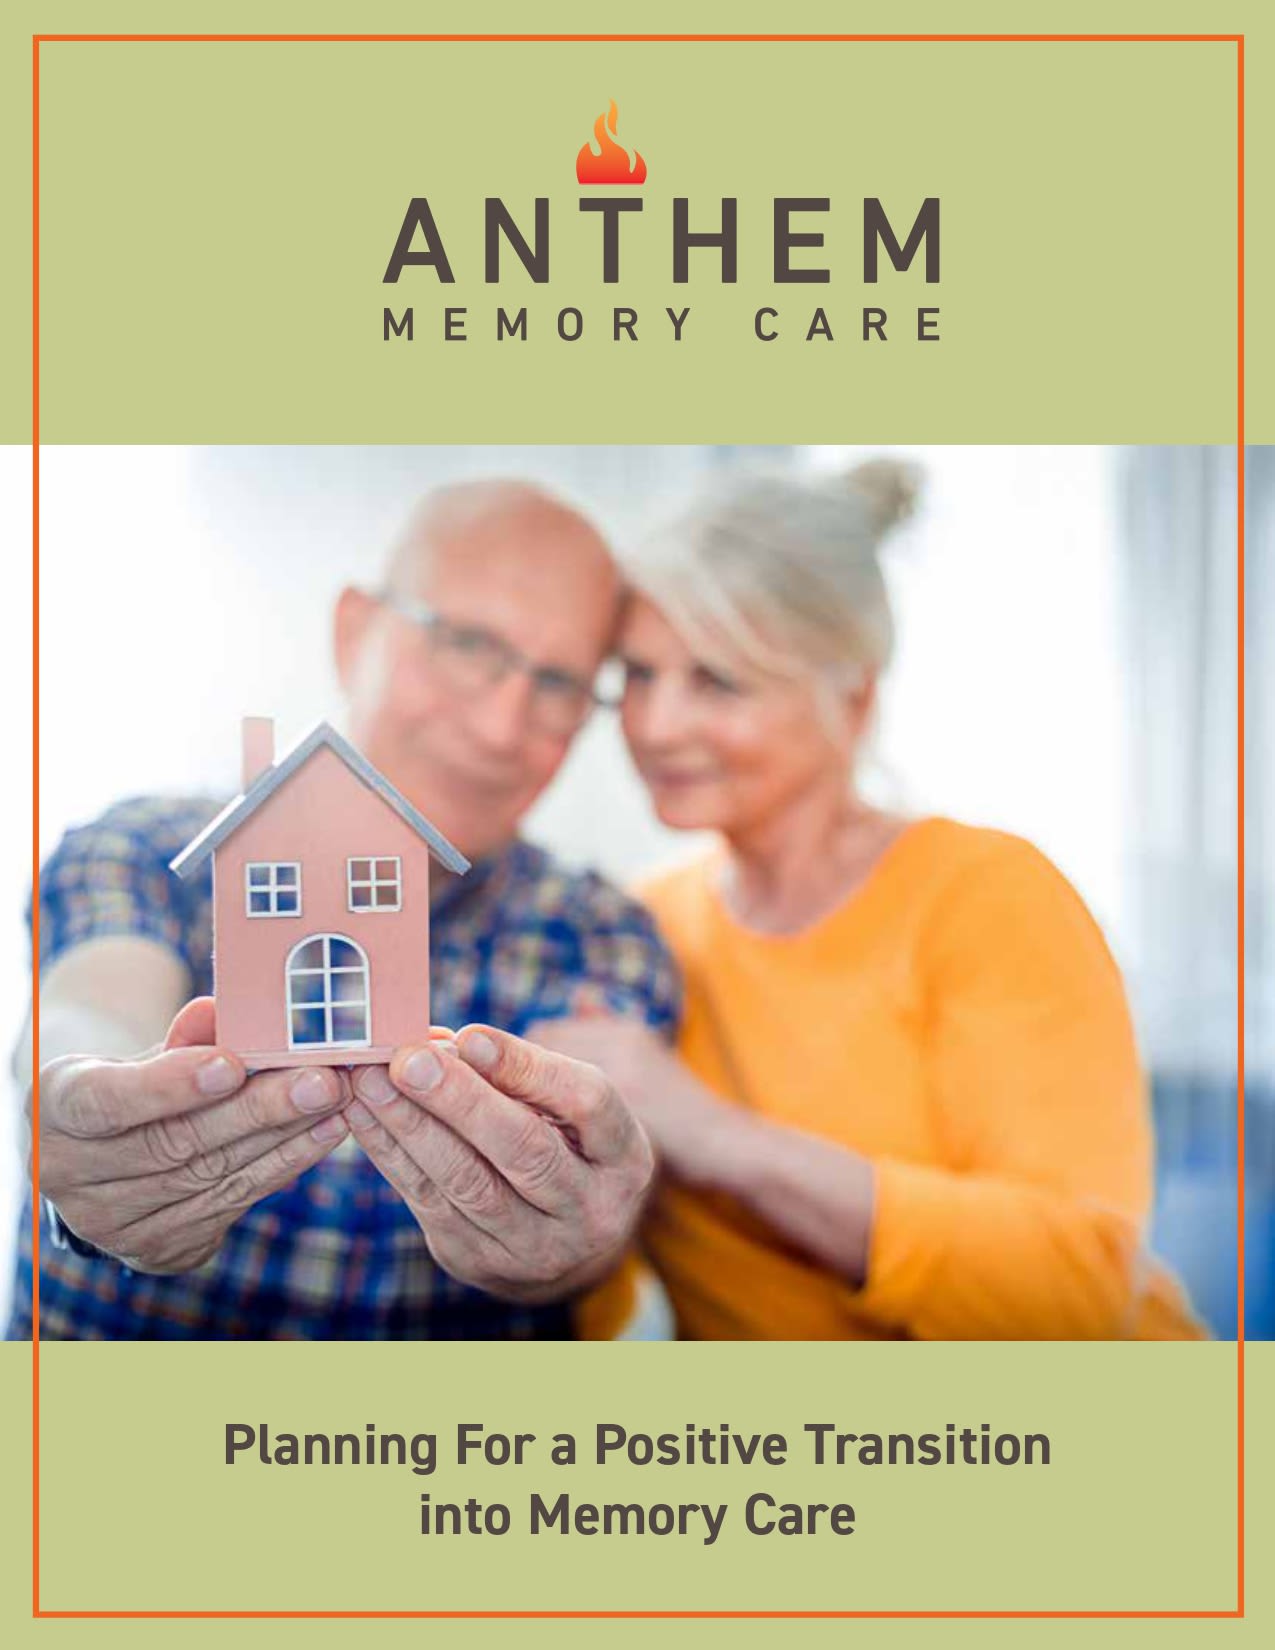 Anthem Flyer at Pinnacle Place Memory Care in Little Rock, Arkansas